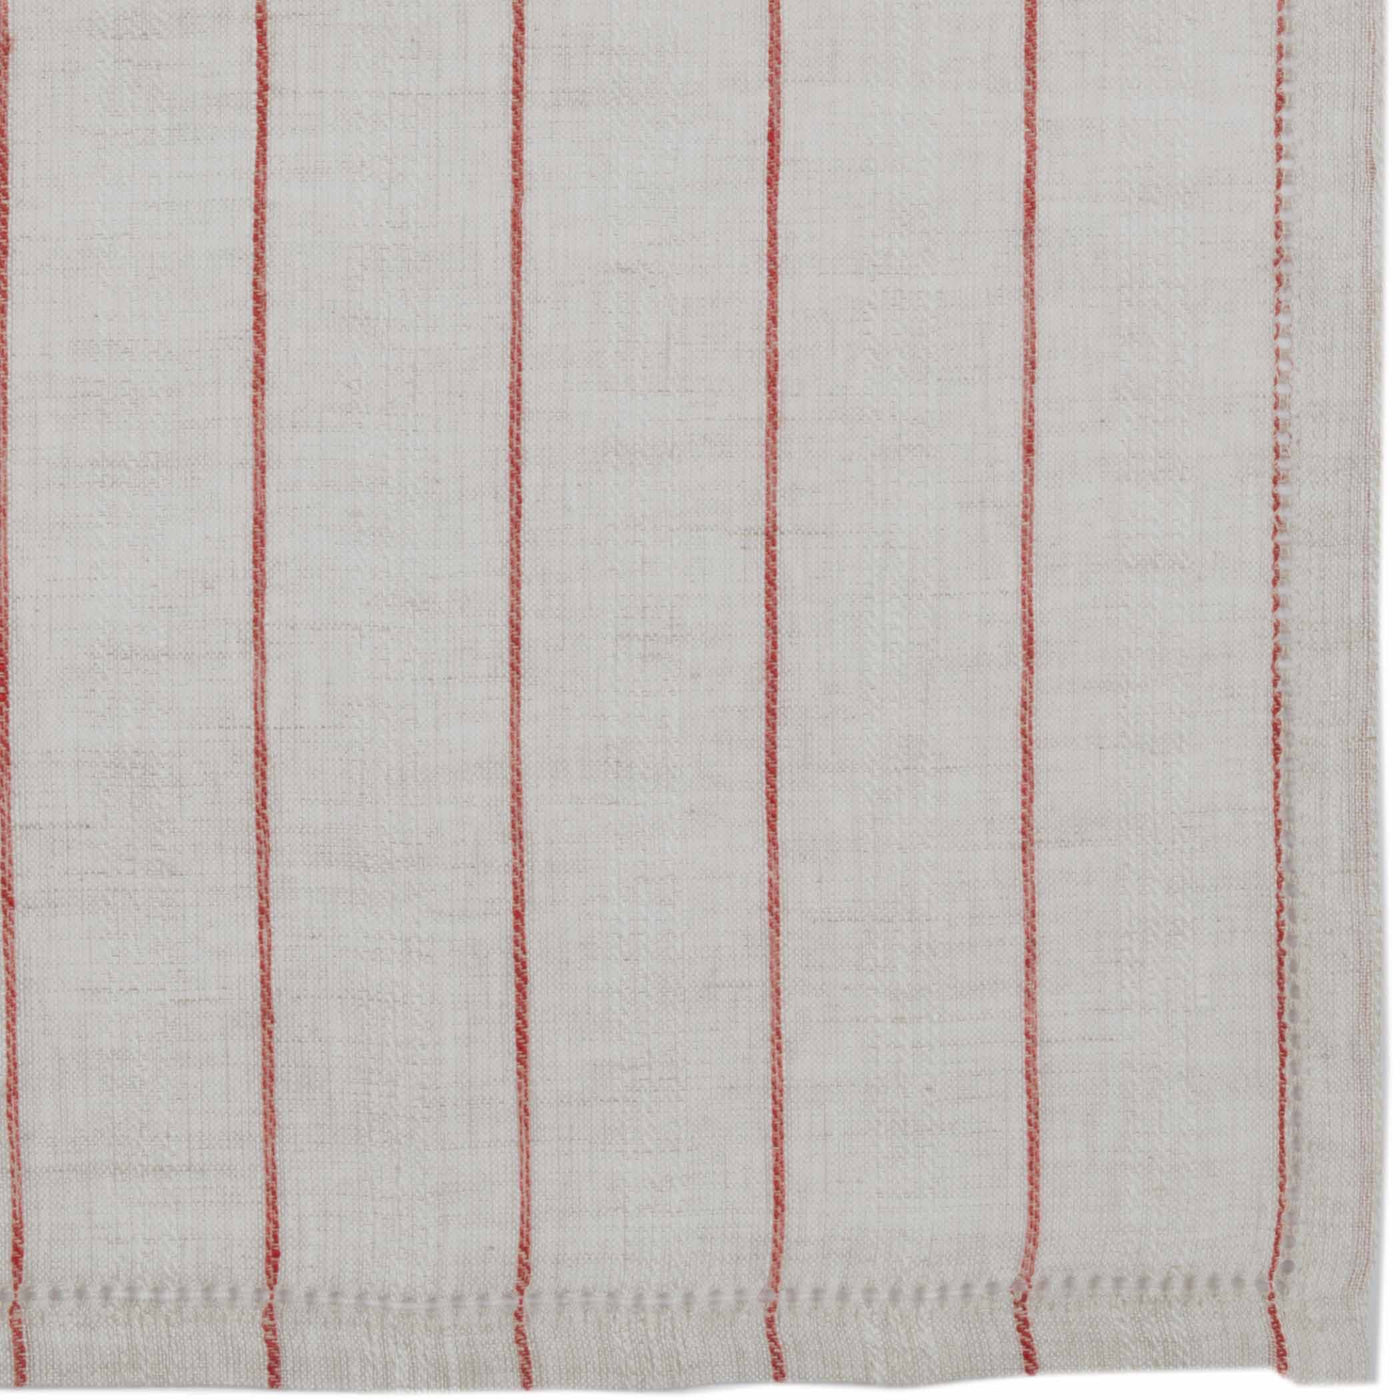 Set of 6 Charley Red Striped Napkin